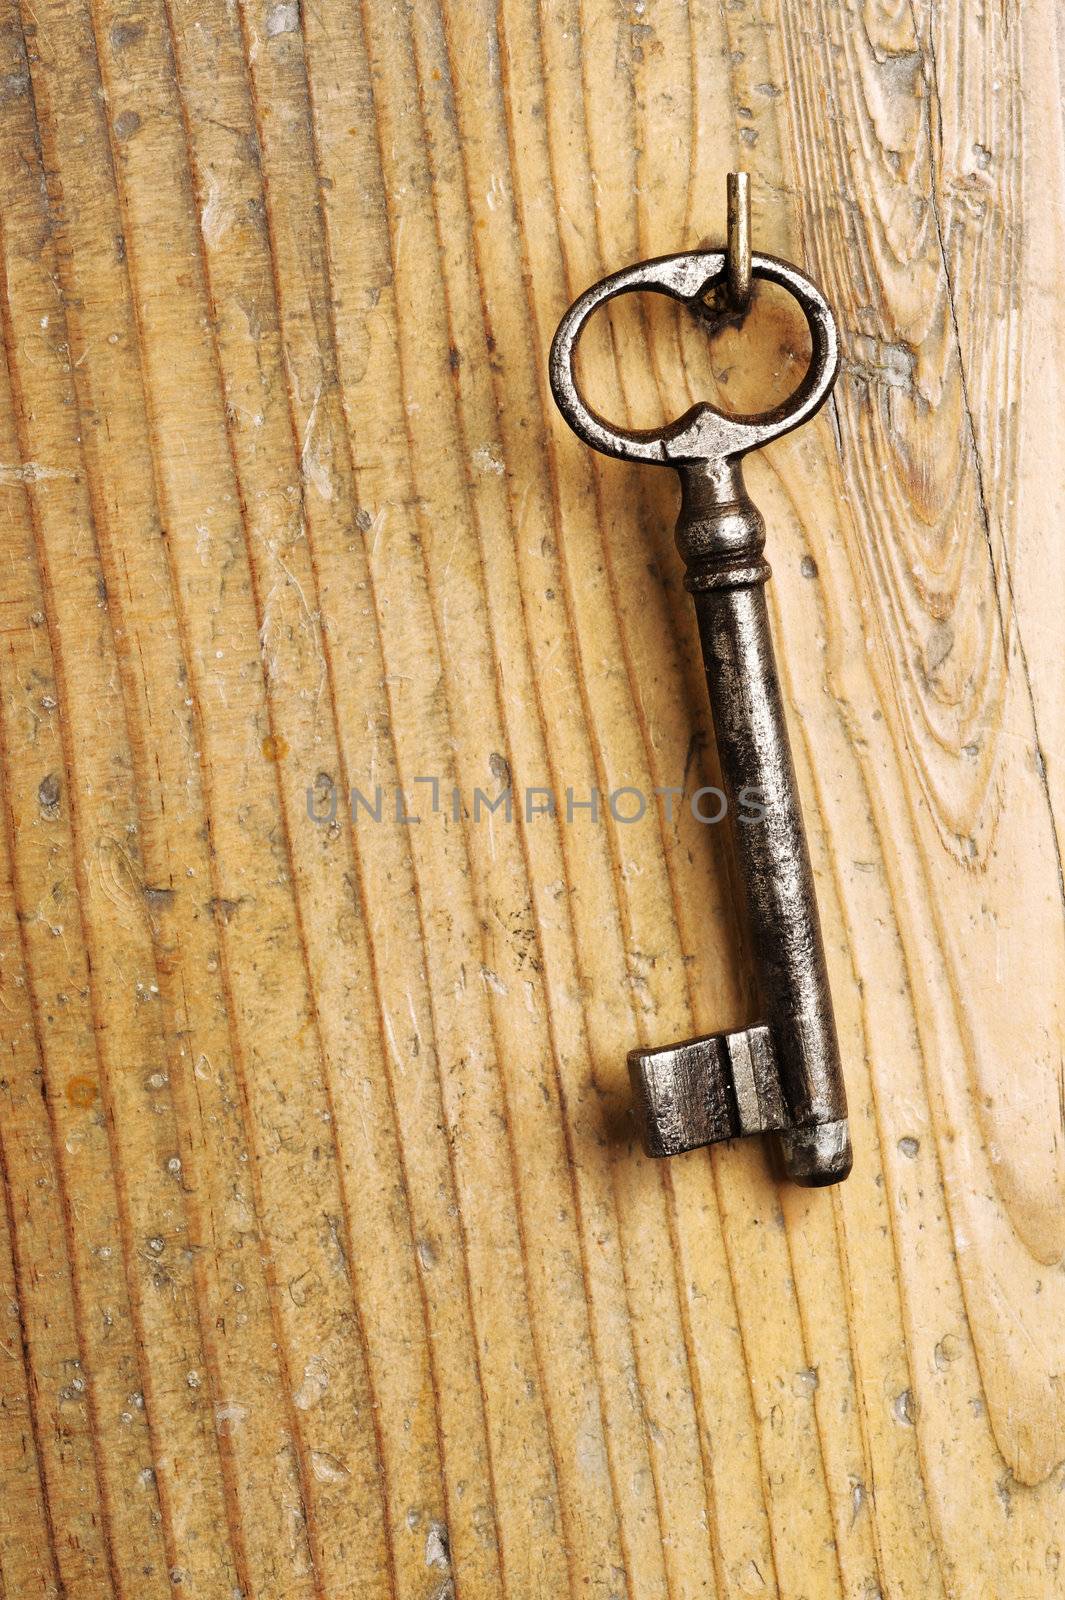 old key on a wooden background by stokkete